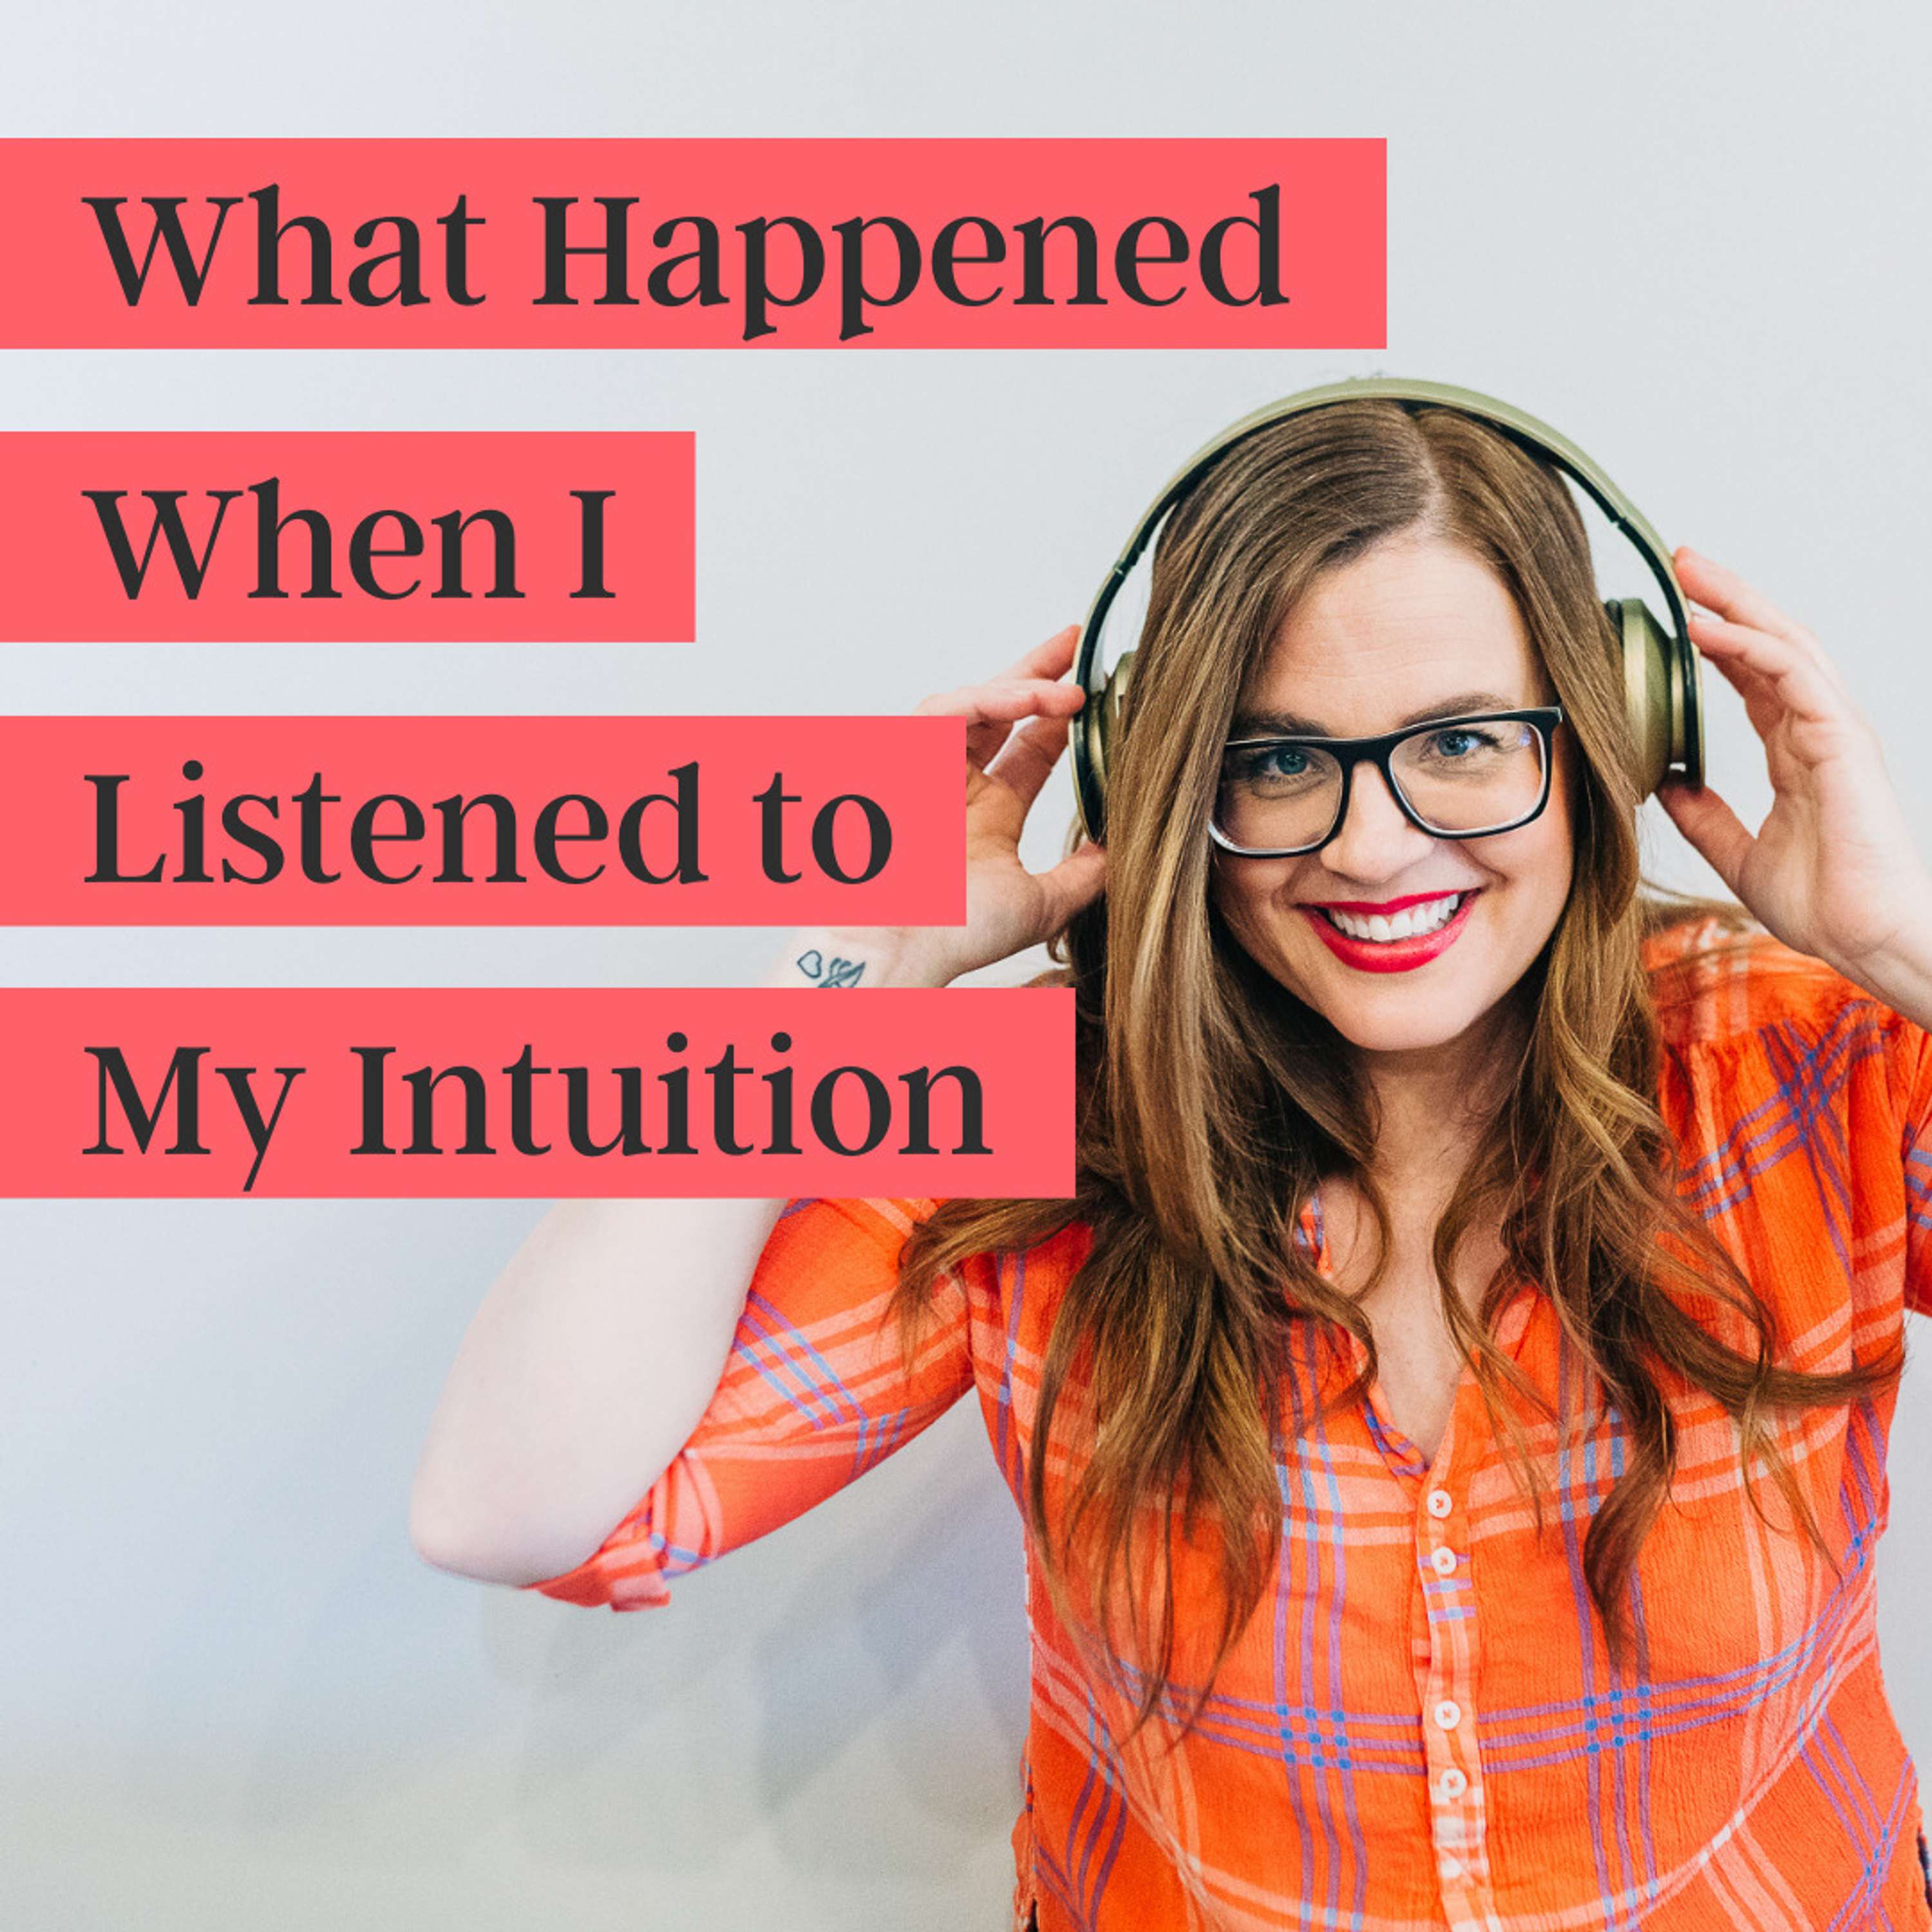 34. Walking My Talk (on Intuition)